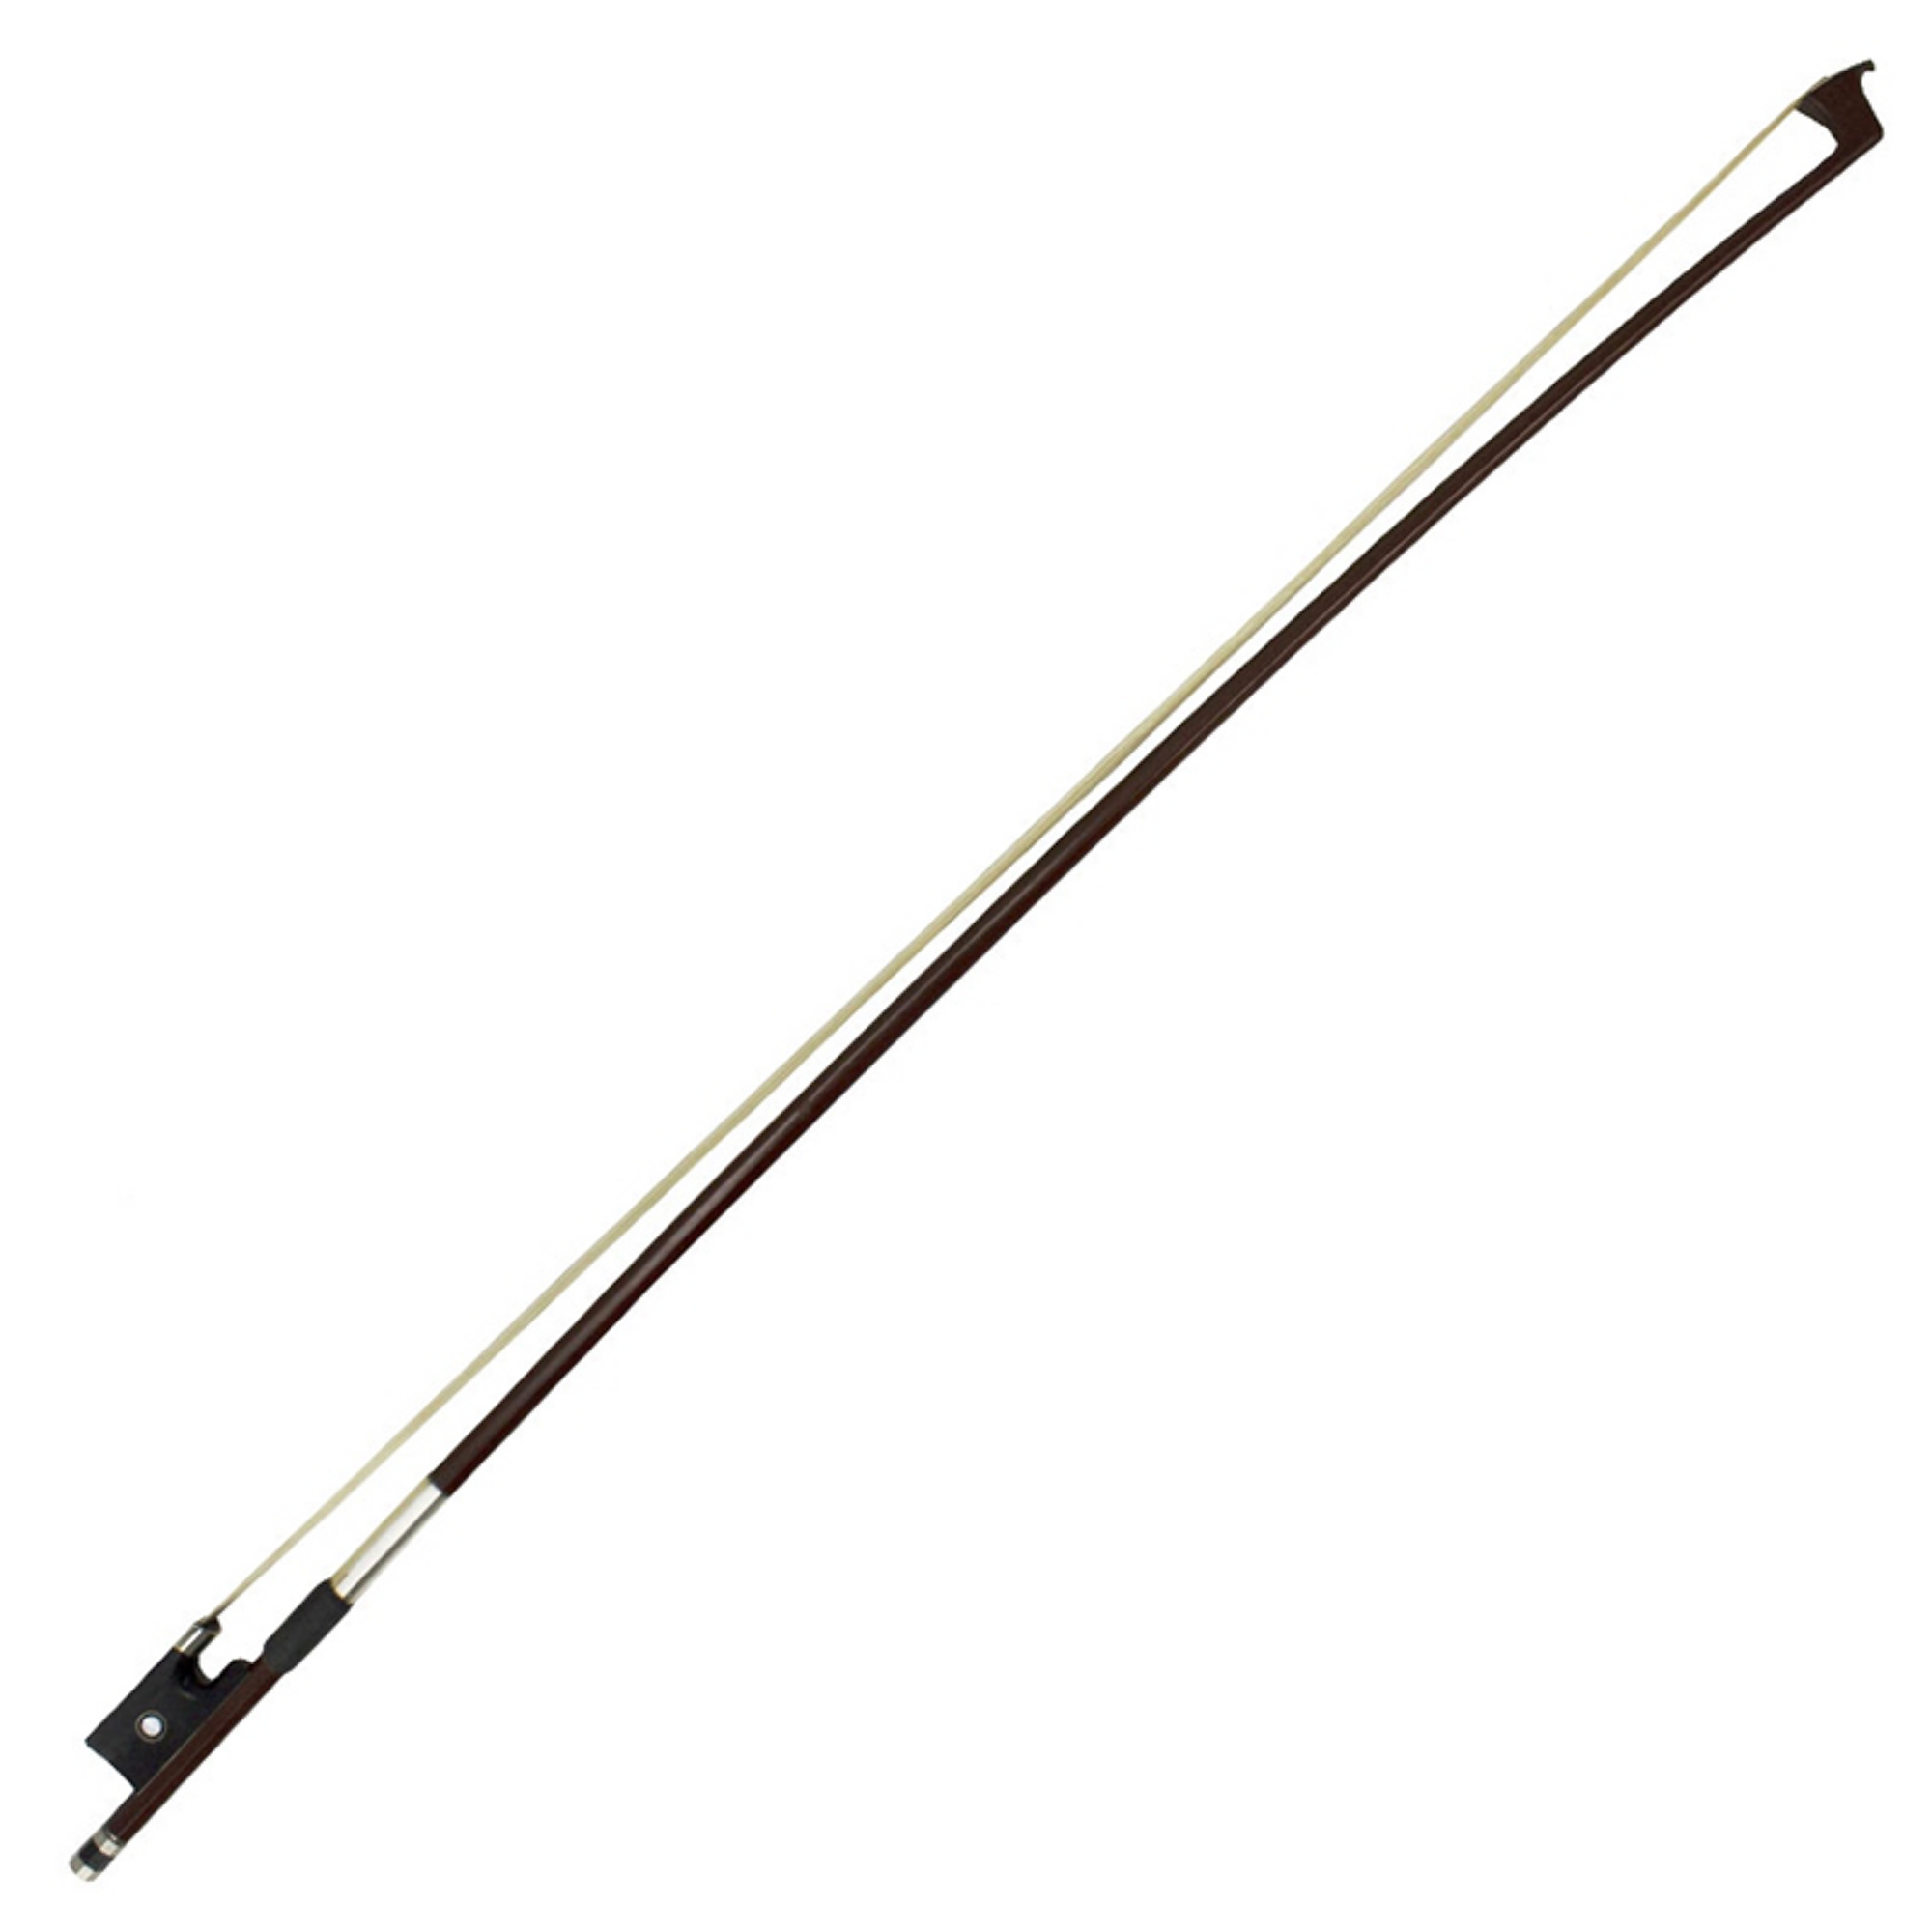 Forenza Violin Bow - 1-4 Size